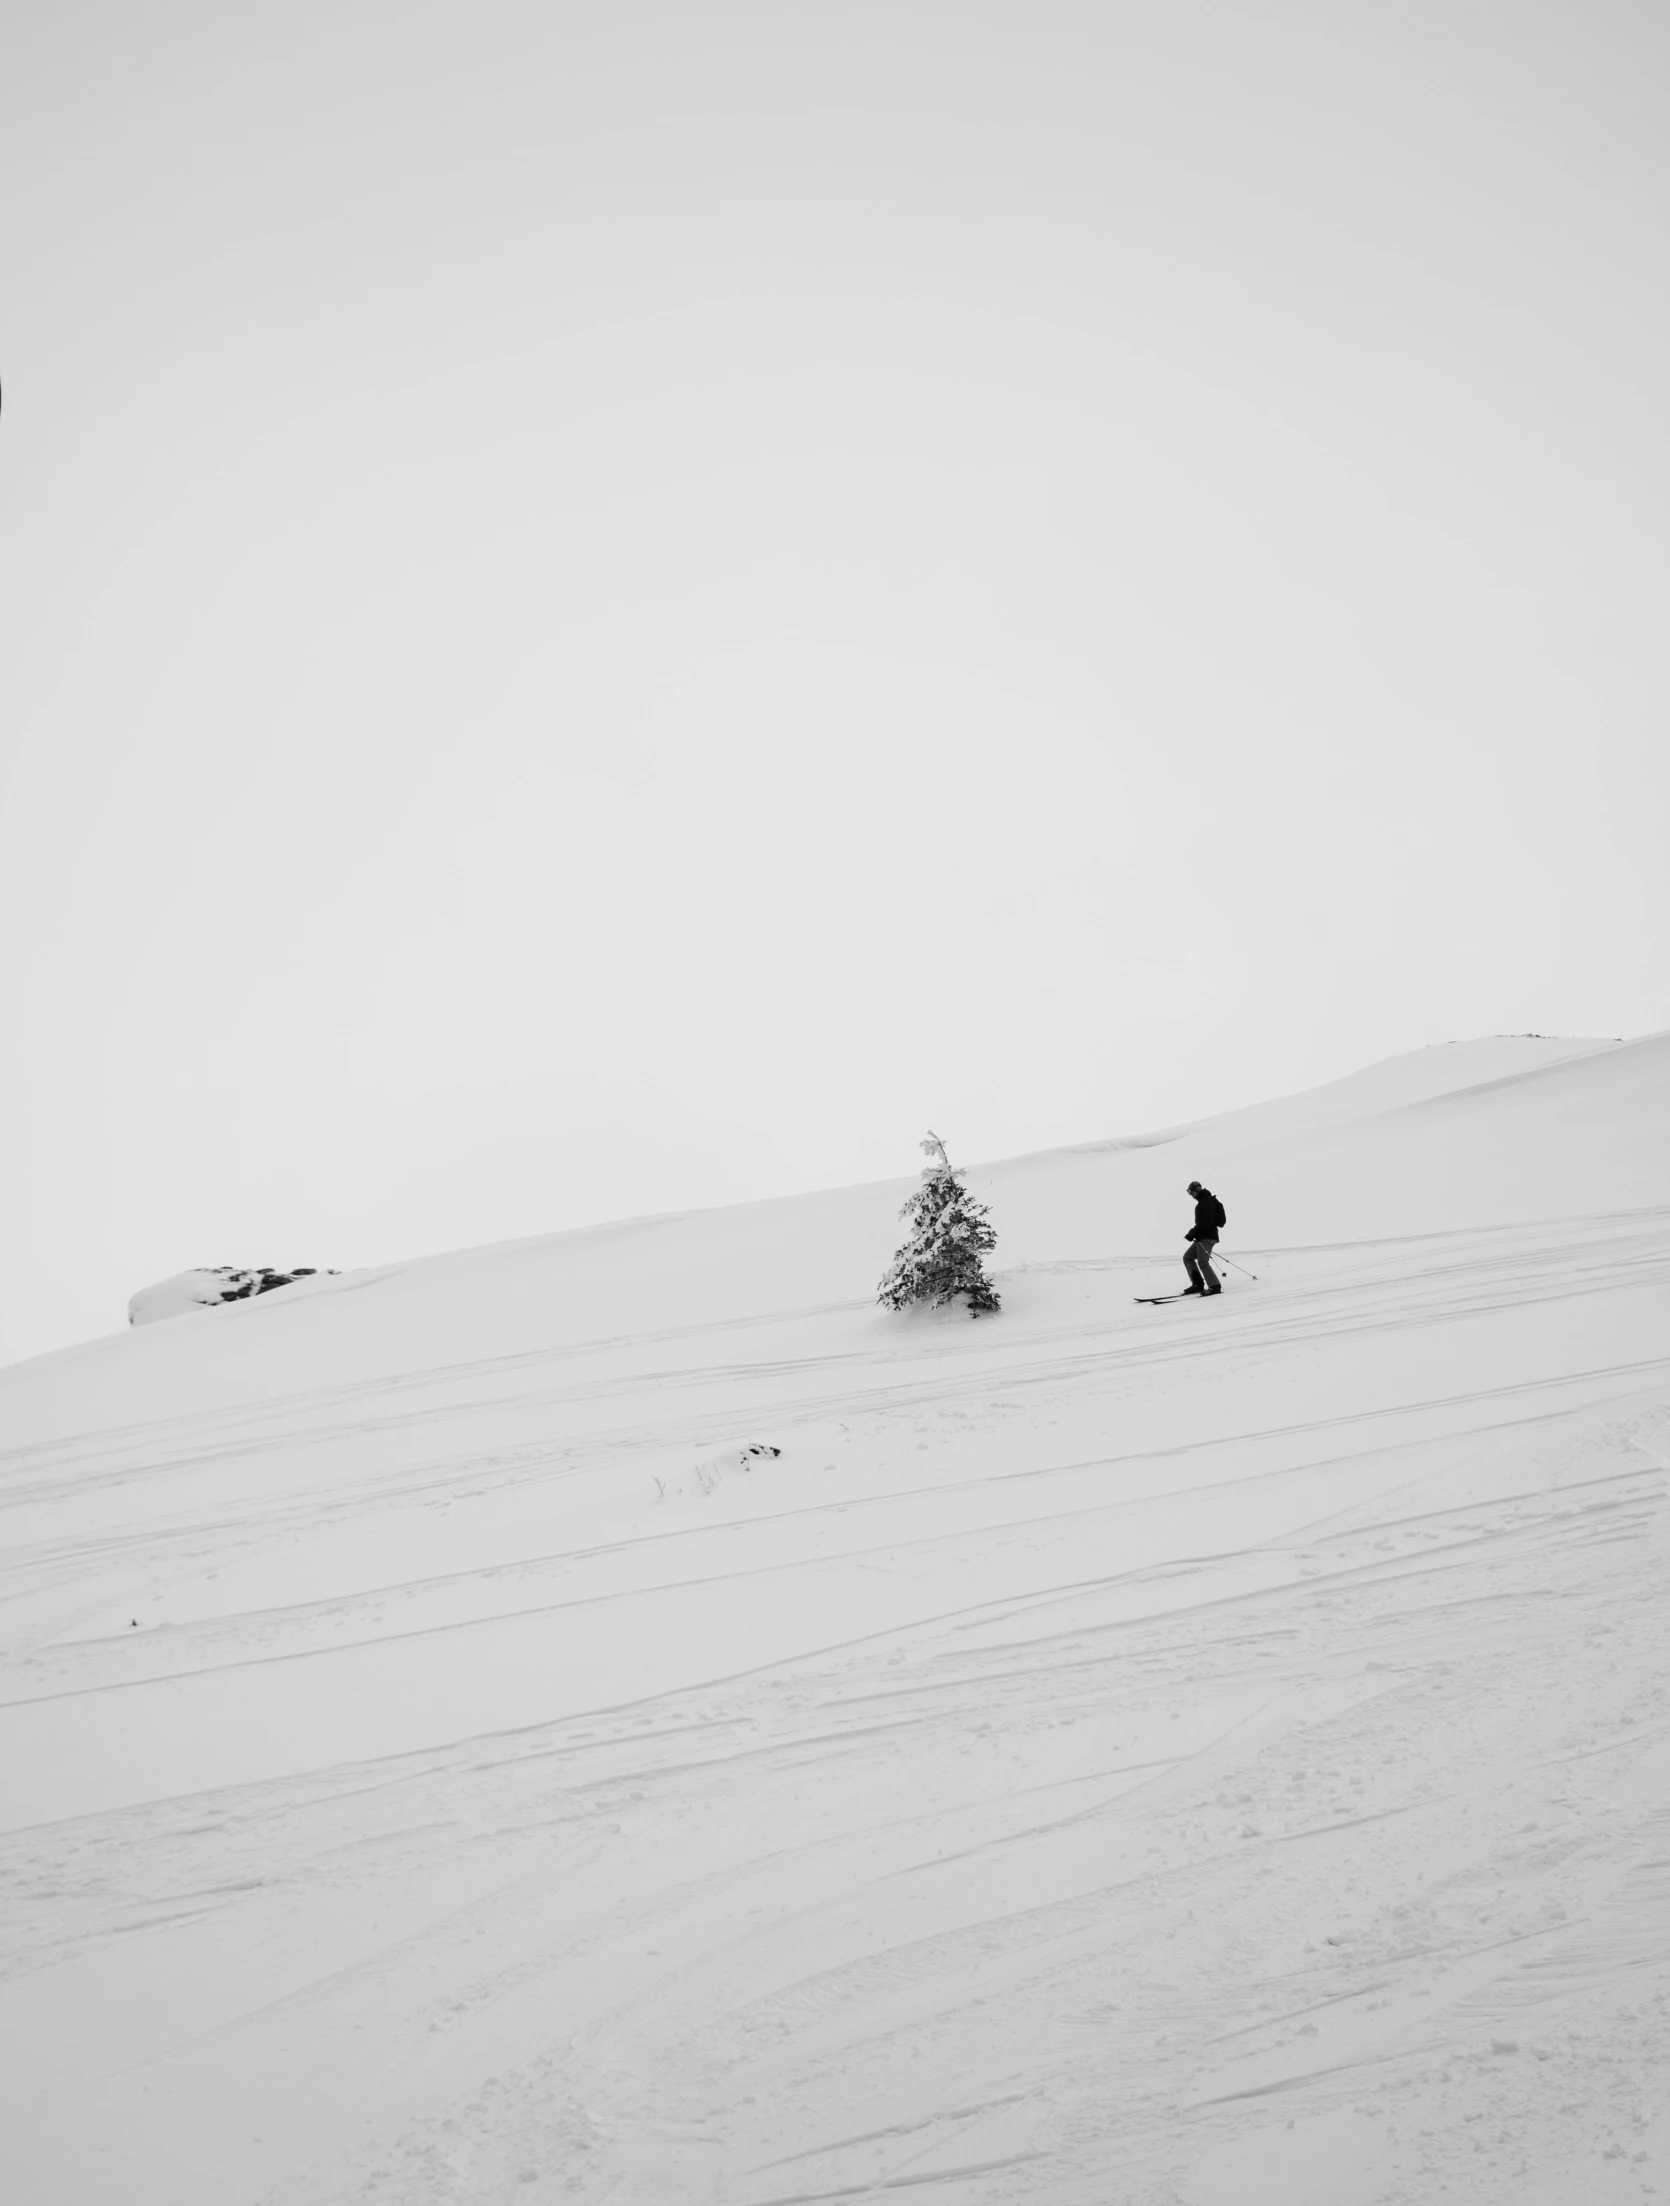 two skiers move along the snow while a skier attempts to ski